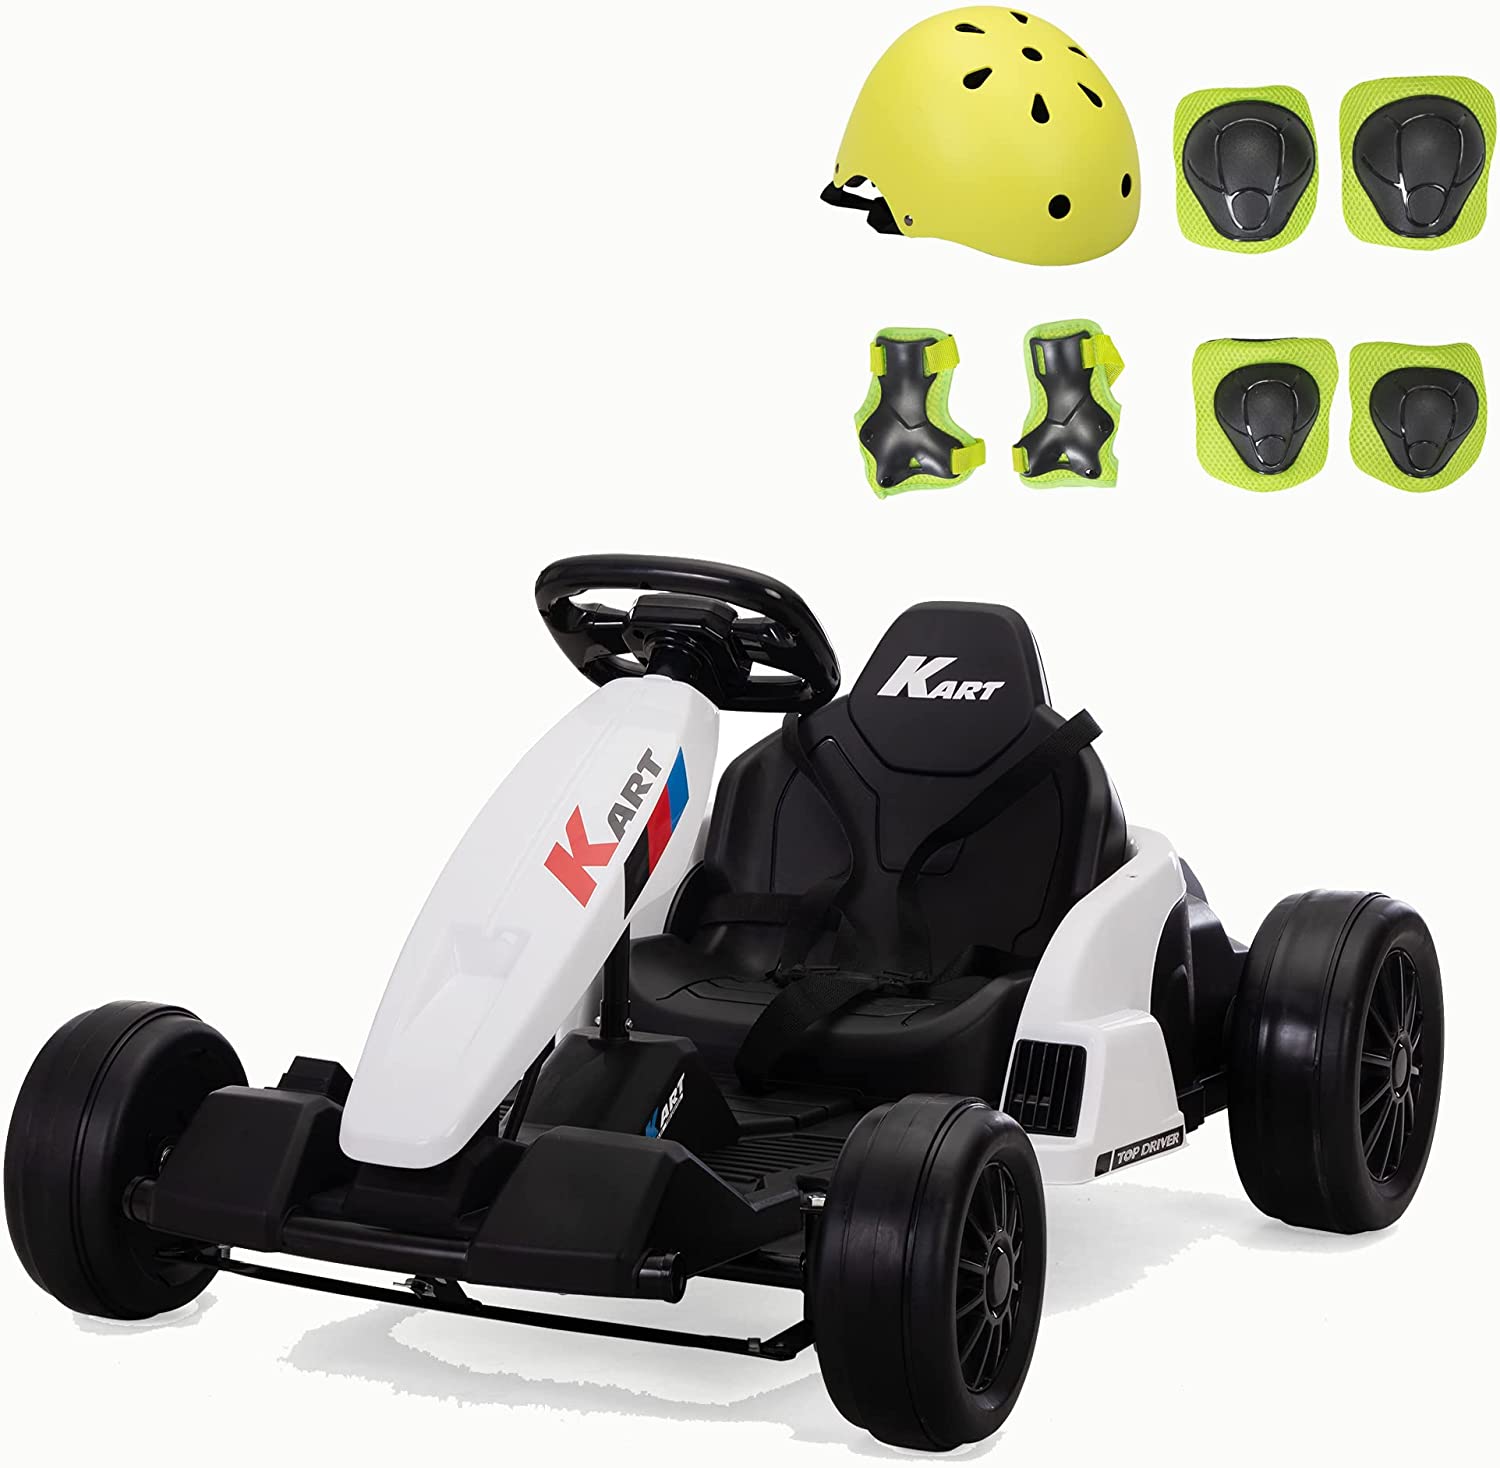 Tobbi 24V Electric Kids Go Kart, Battery Powered Drift Racing Ride On Toy Car with Protective Suits, Horn, MP3, White+Black 718fvpXB7GL. AC SL1500